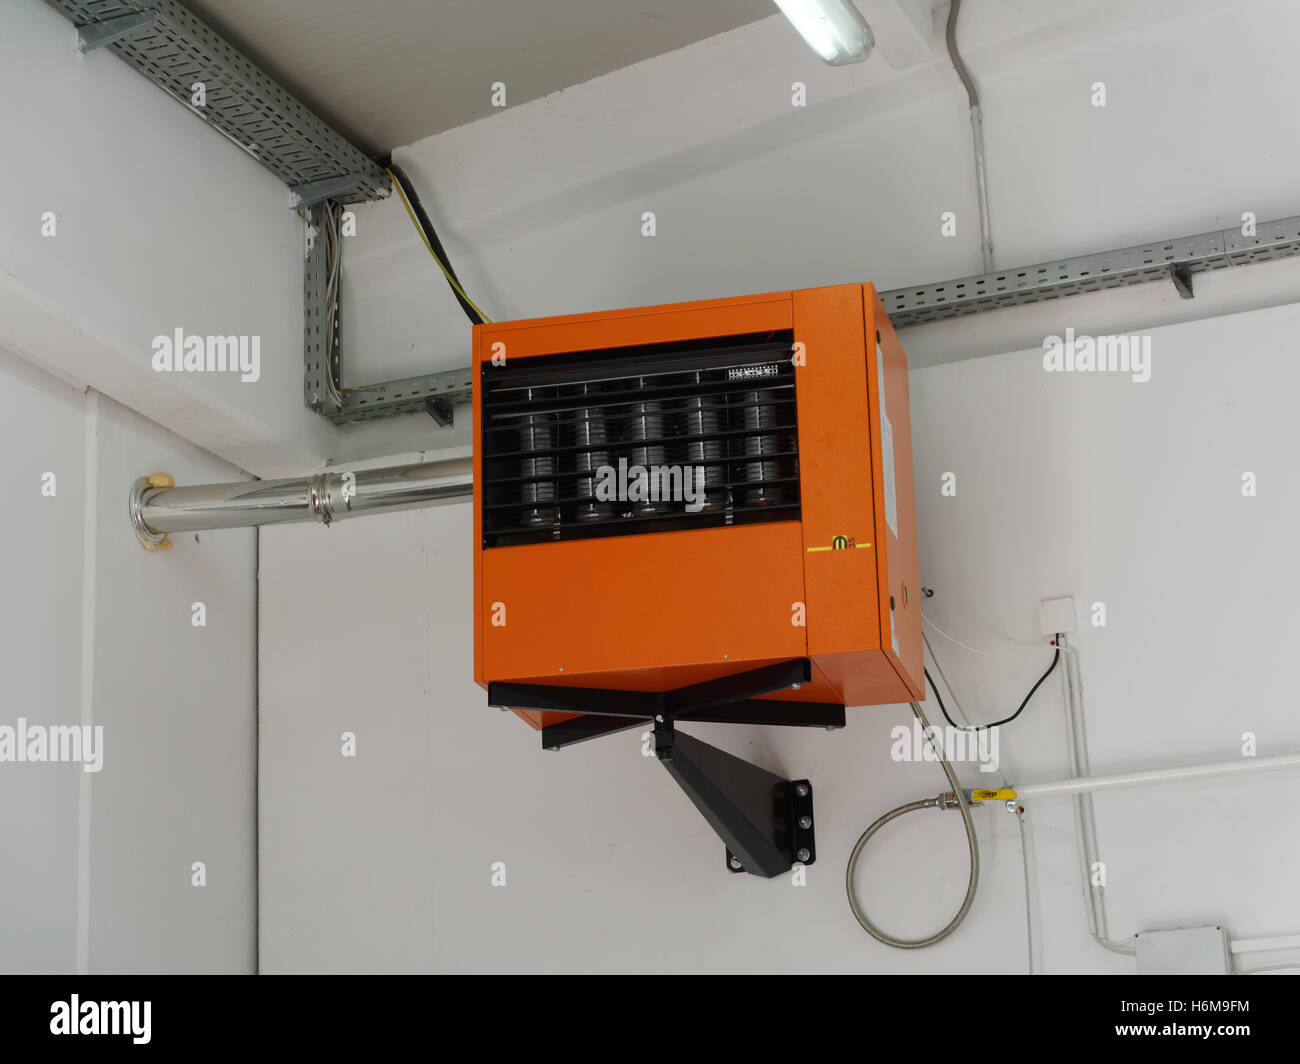 Industrial gas heating device Stock Photo